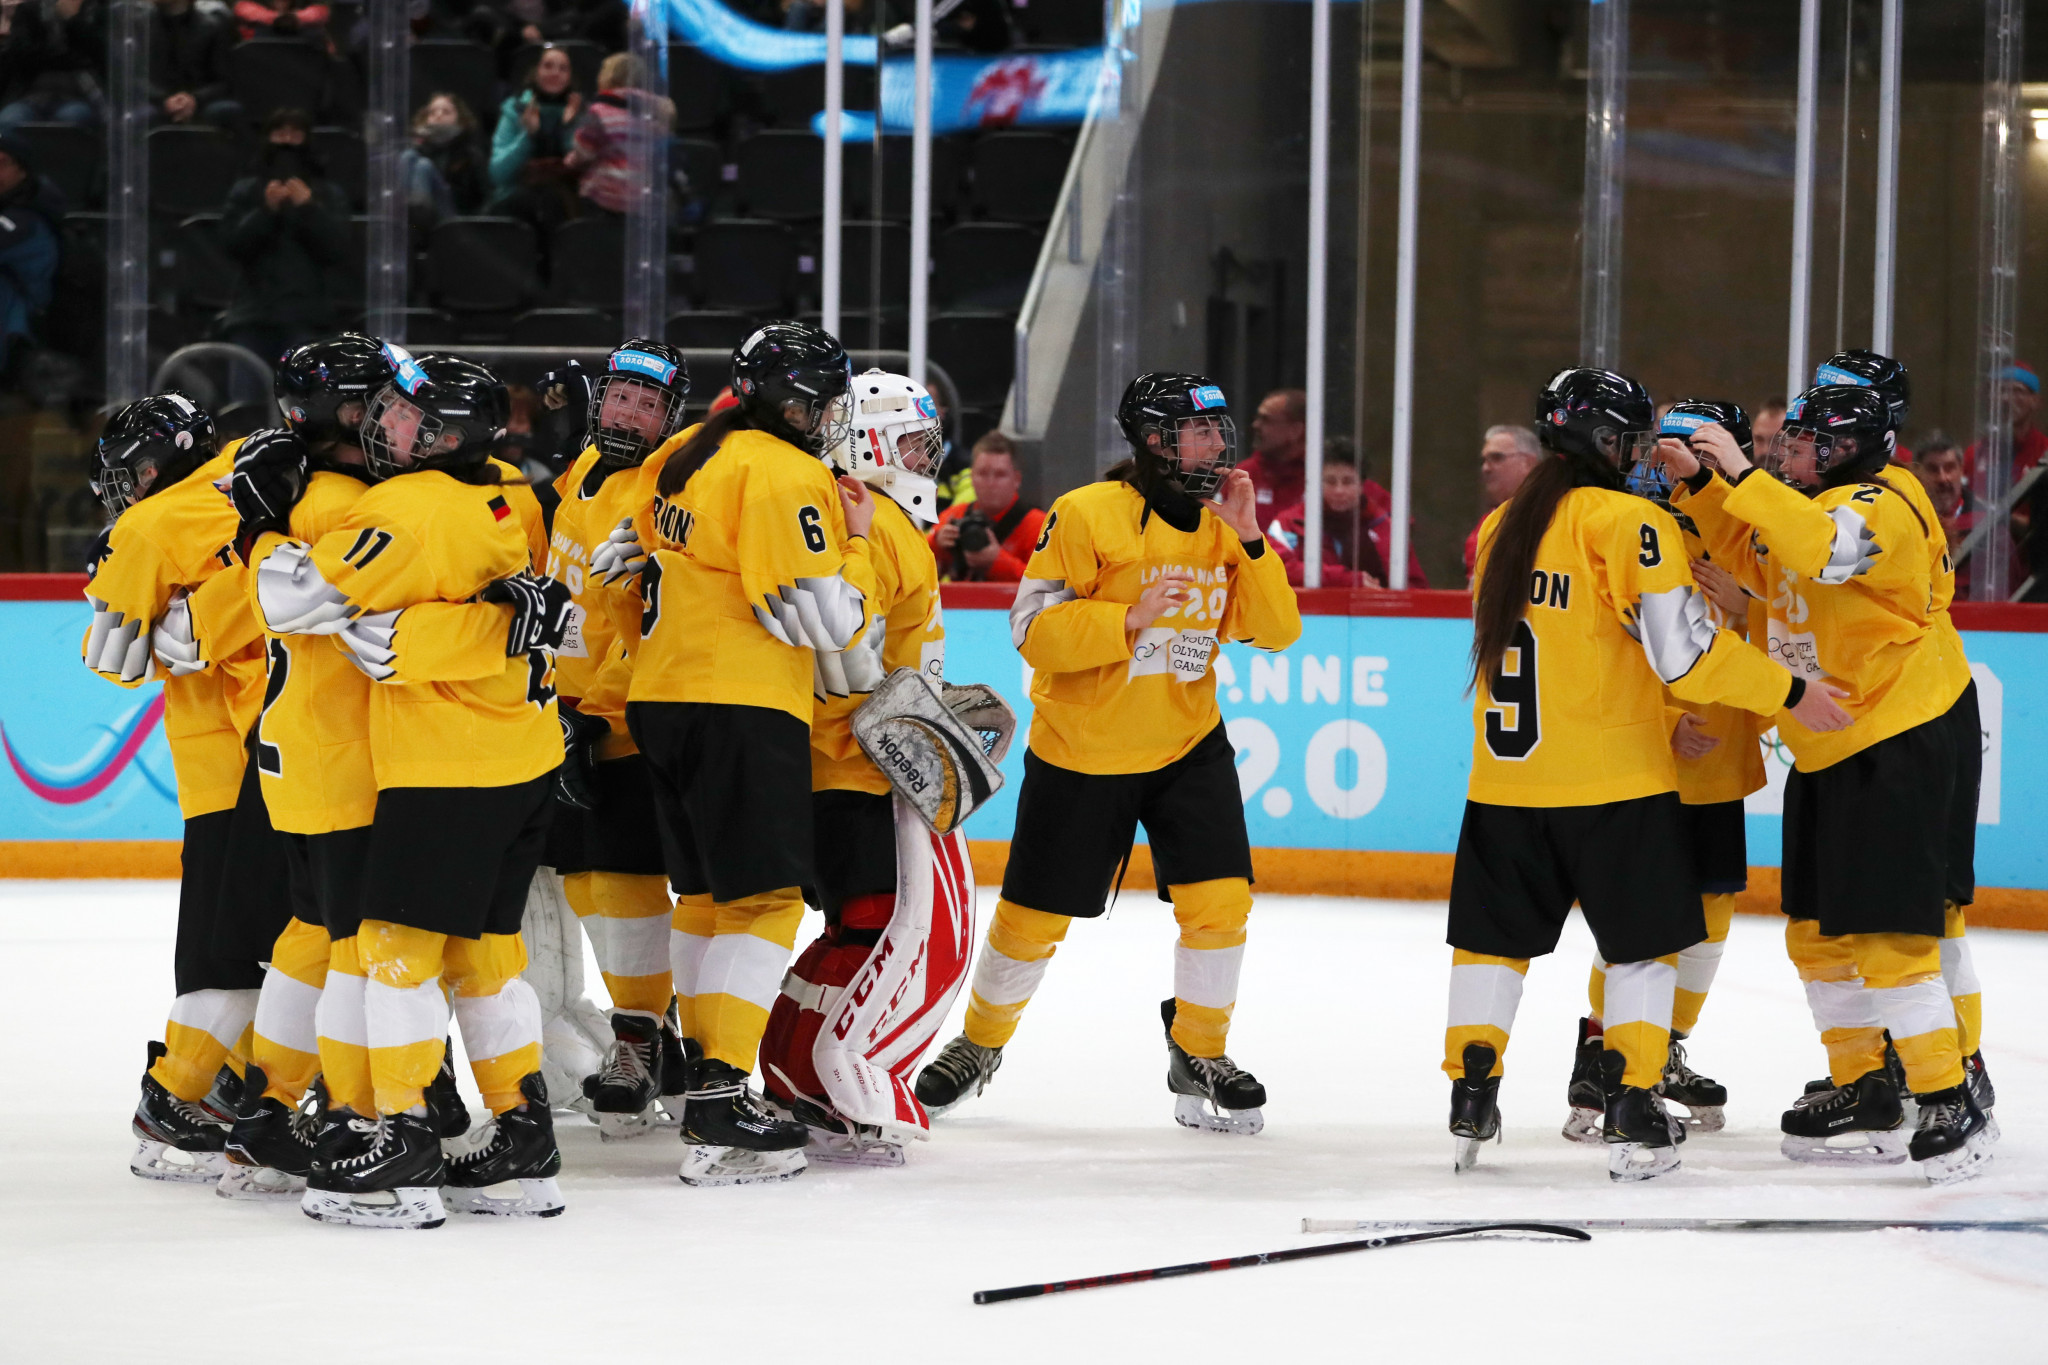 The Yellow team celebrated victory in the women's competition ©Getty Images